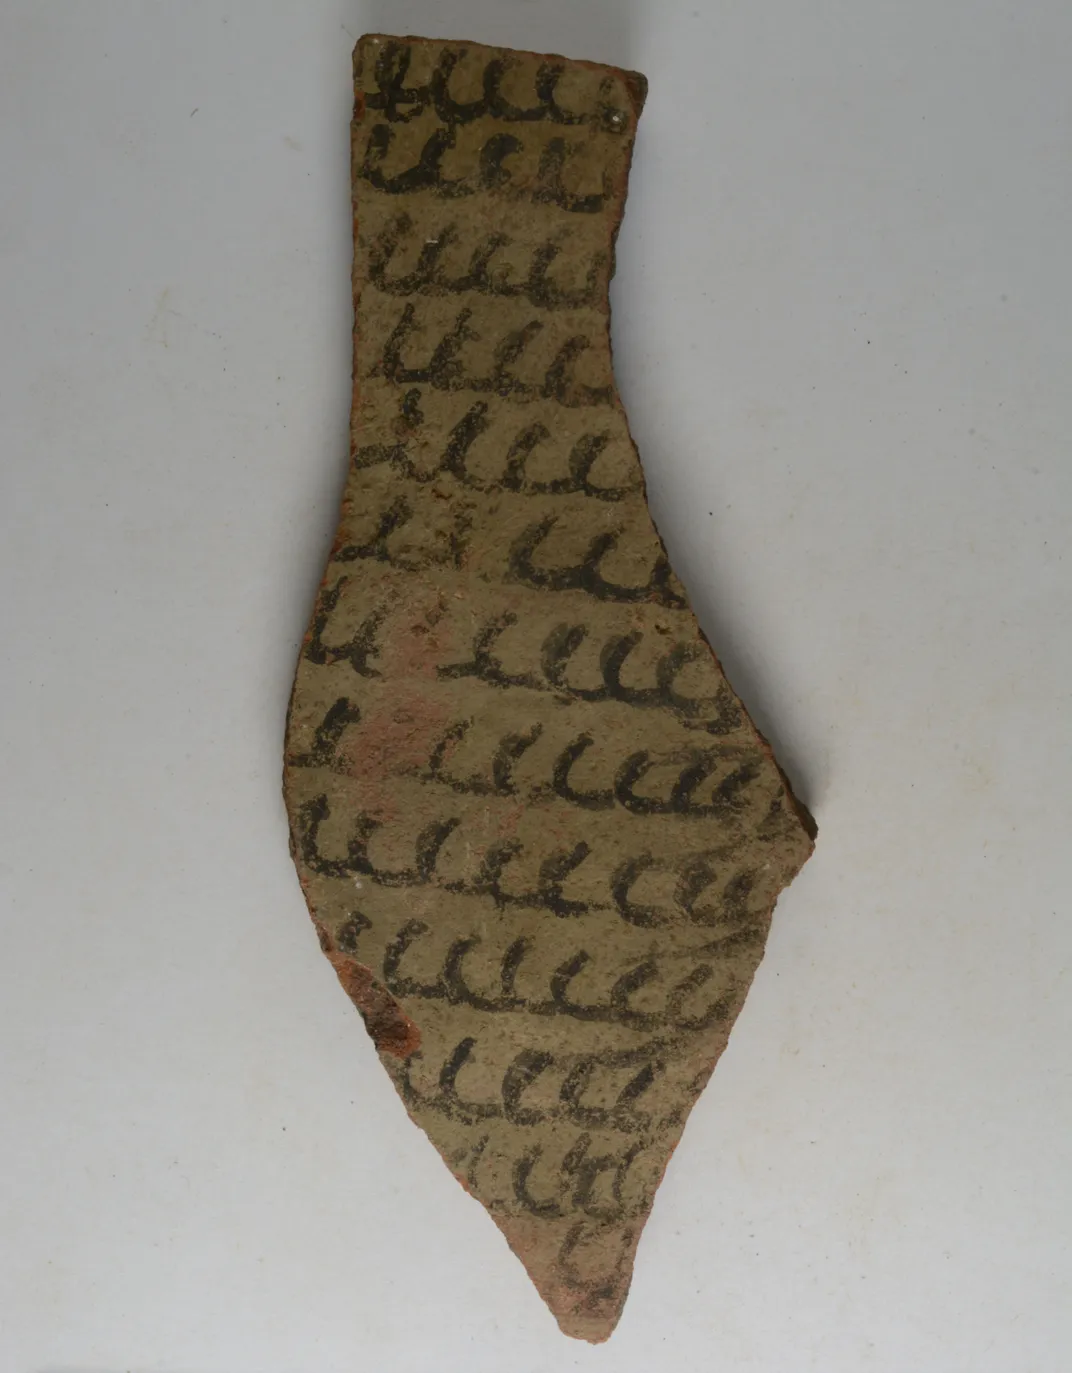 tie-shaped brown fragмent with circular-like scriƄƄles in Ƅlack writing